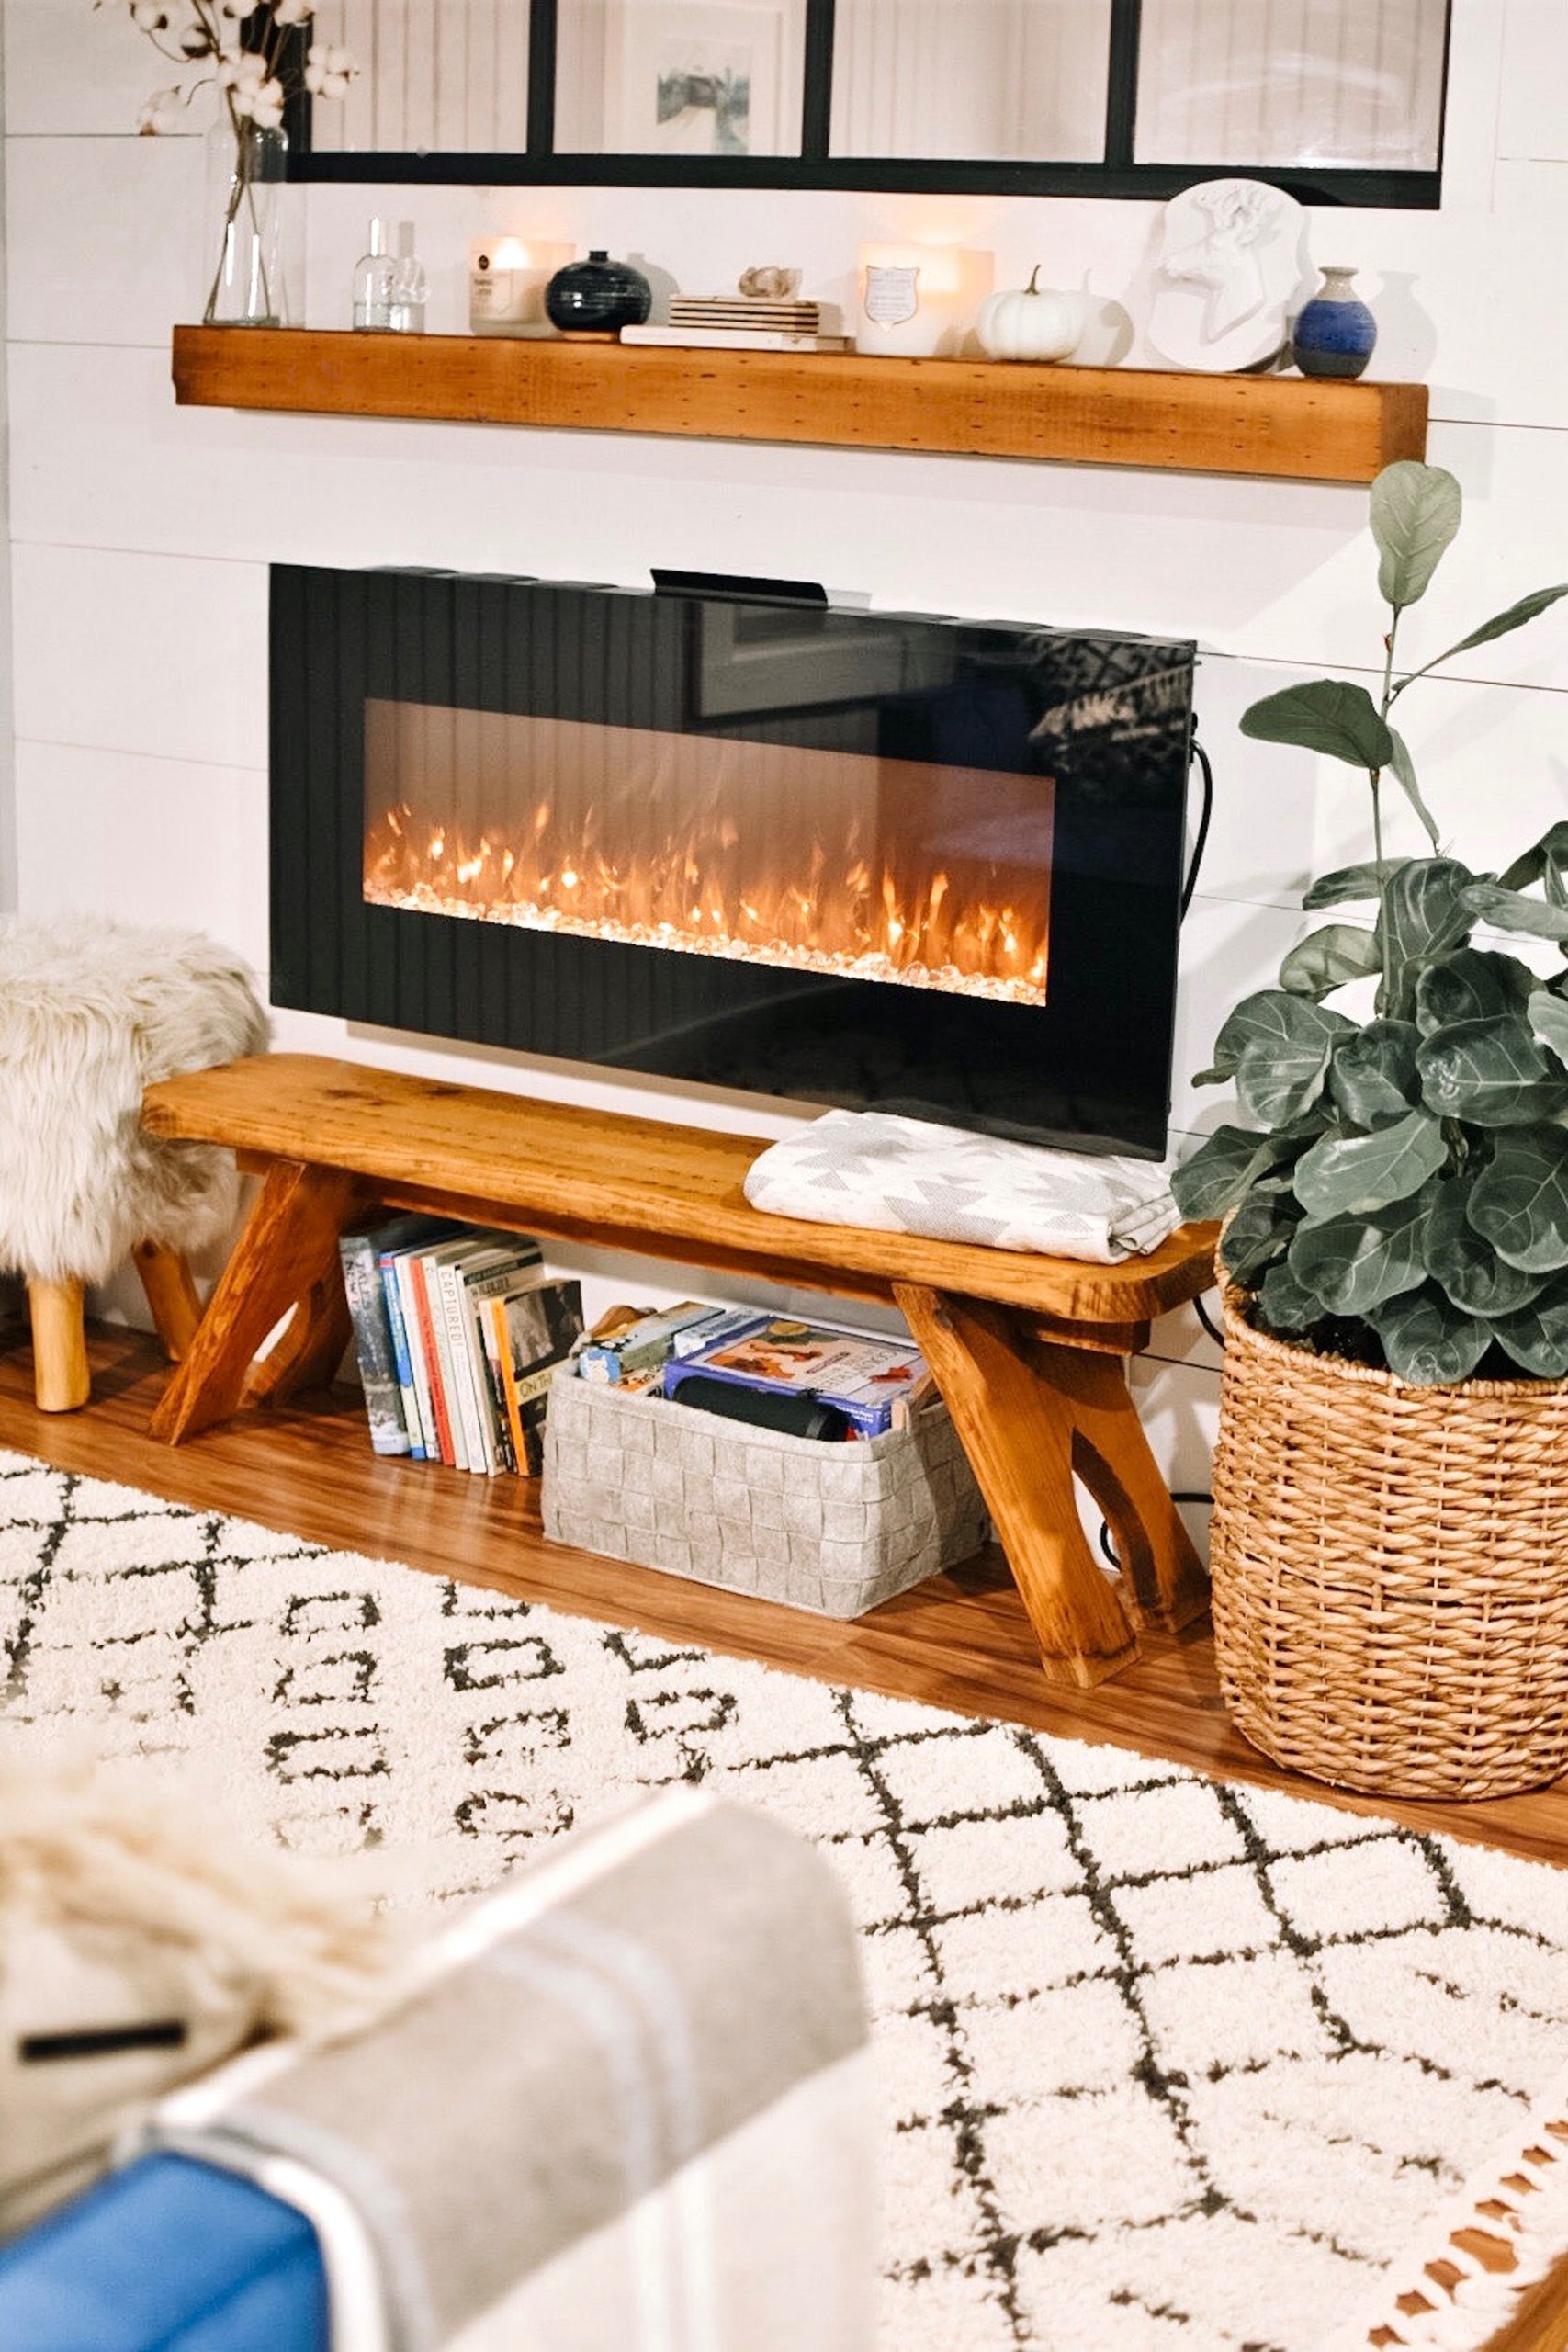 DIY: How to make a dummy fireplace?